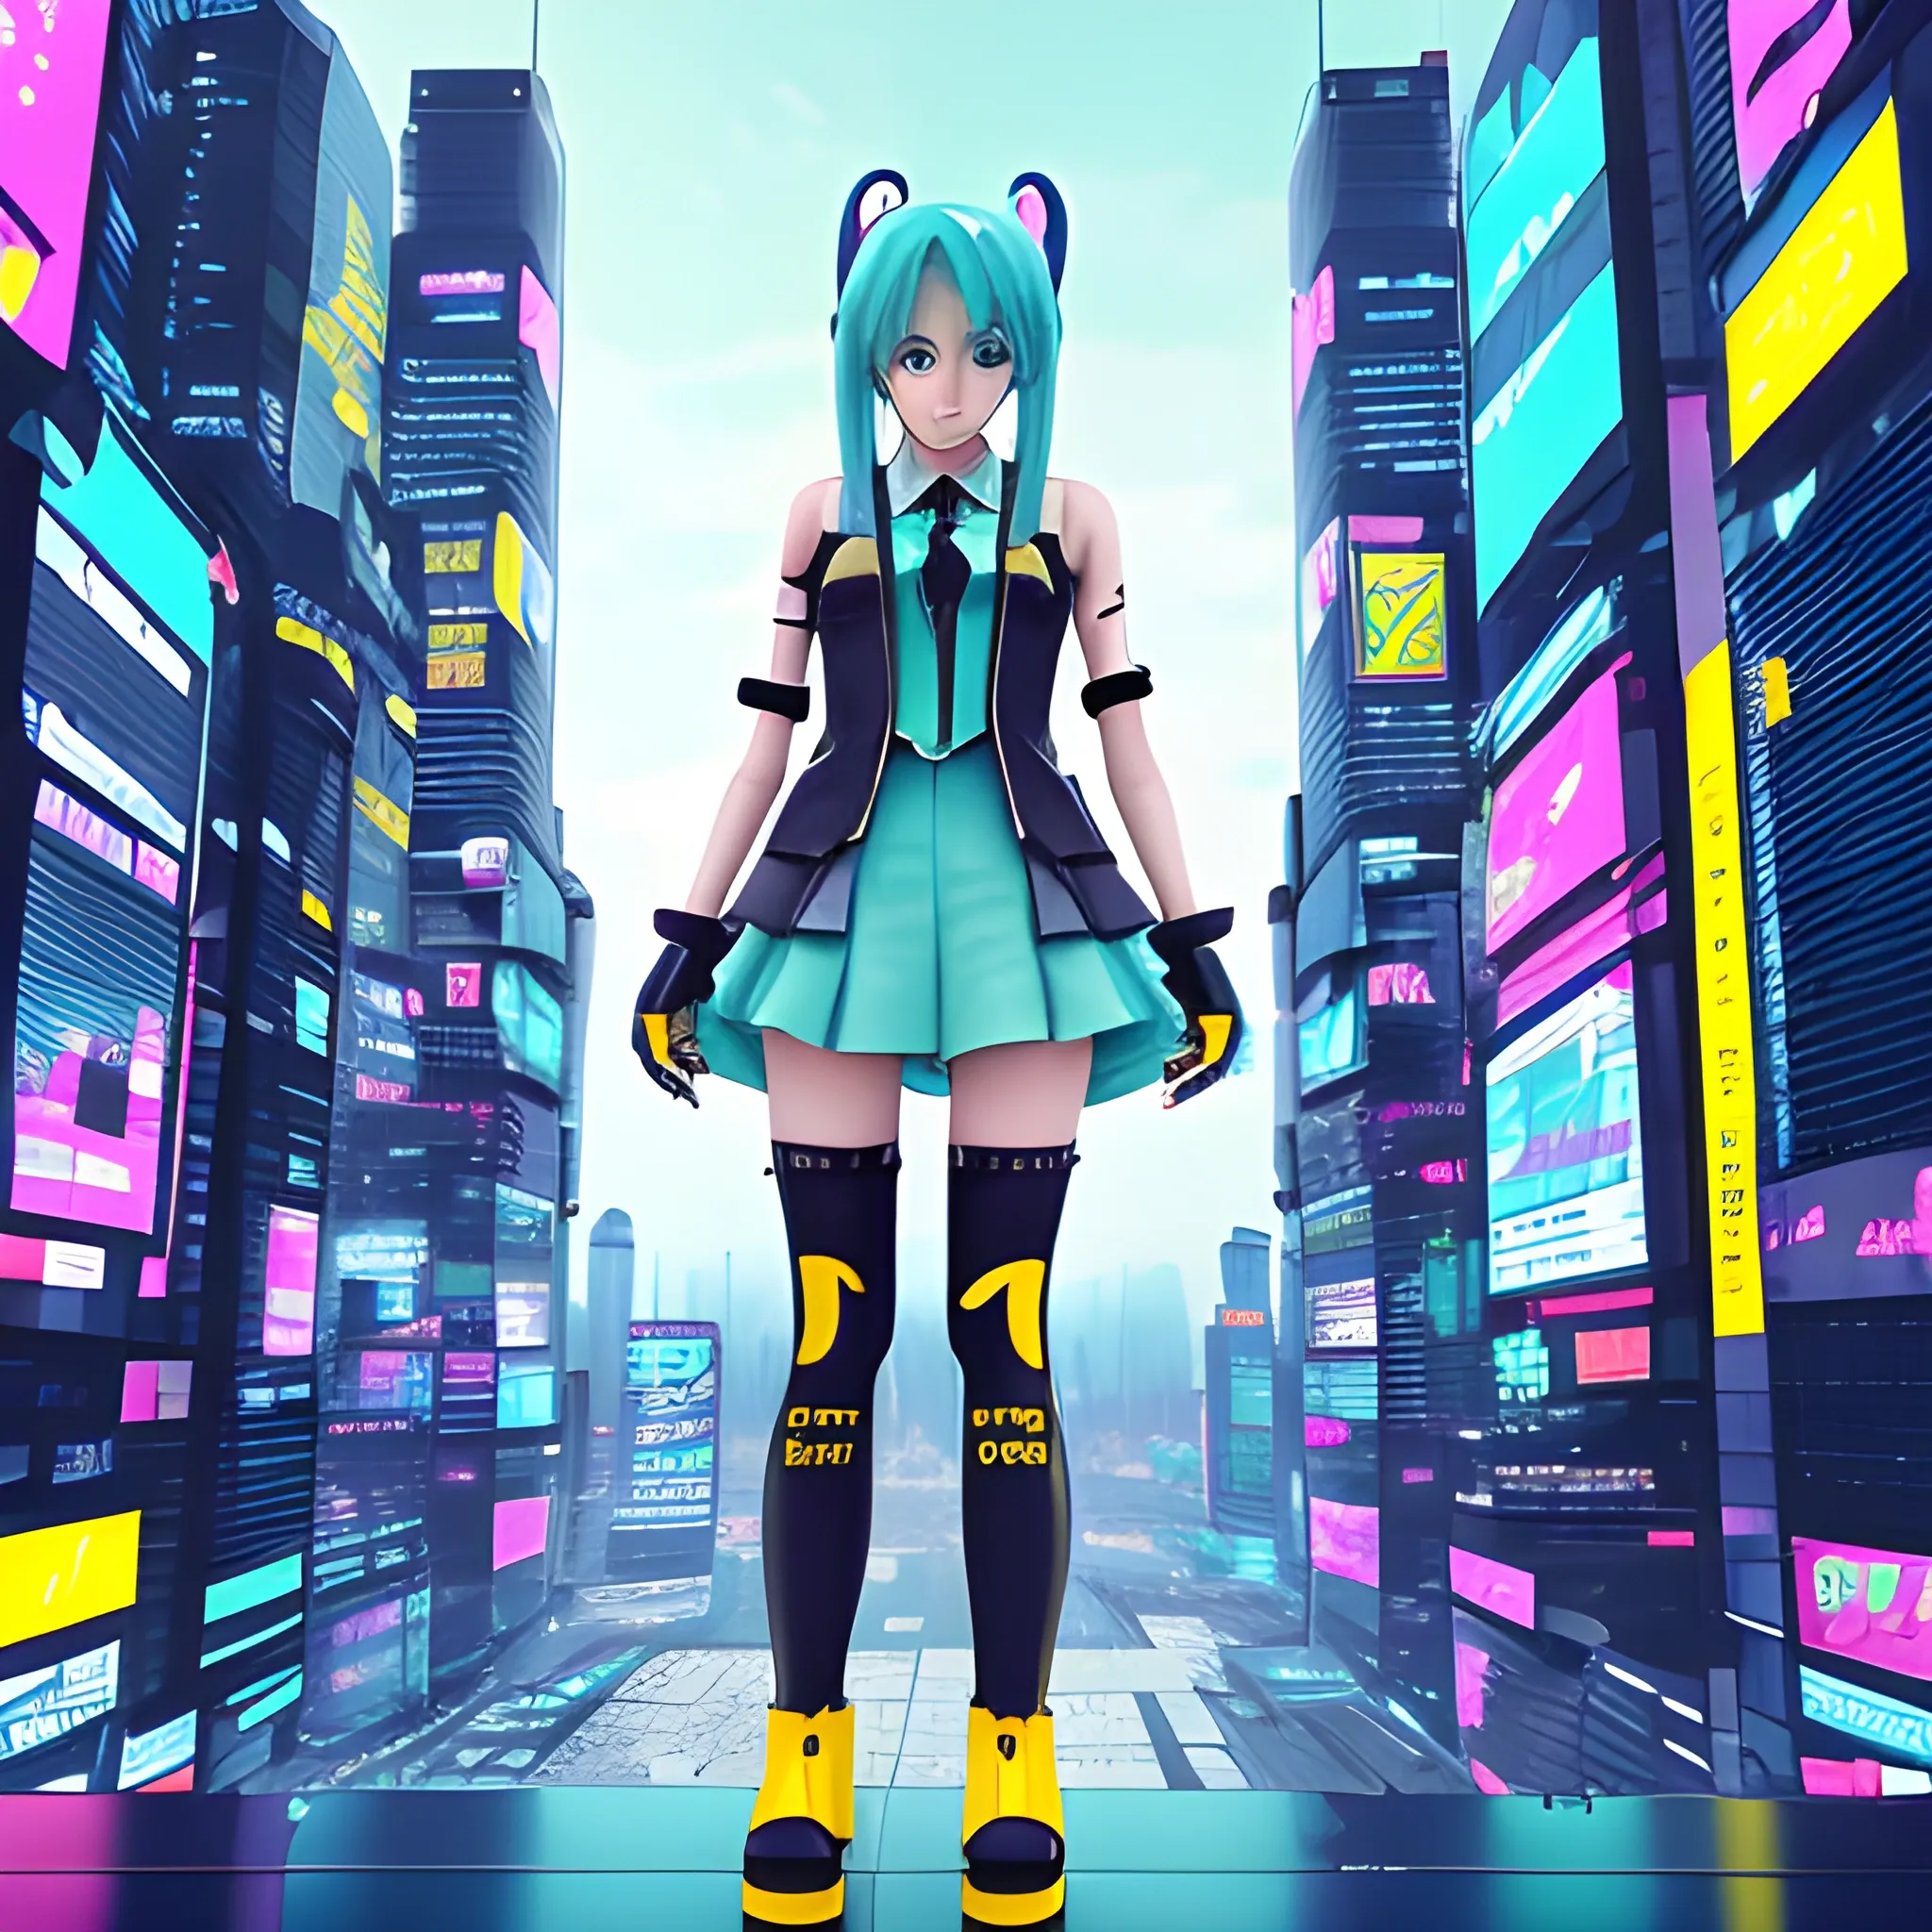 a hatsune miku in a yellow outfit and black boots stands in front of a city, cyberpunk 